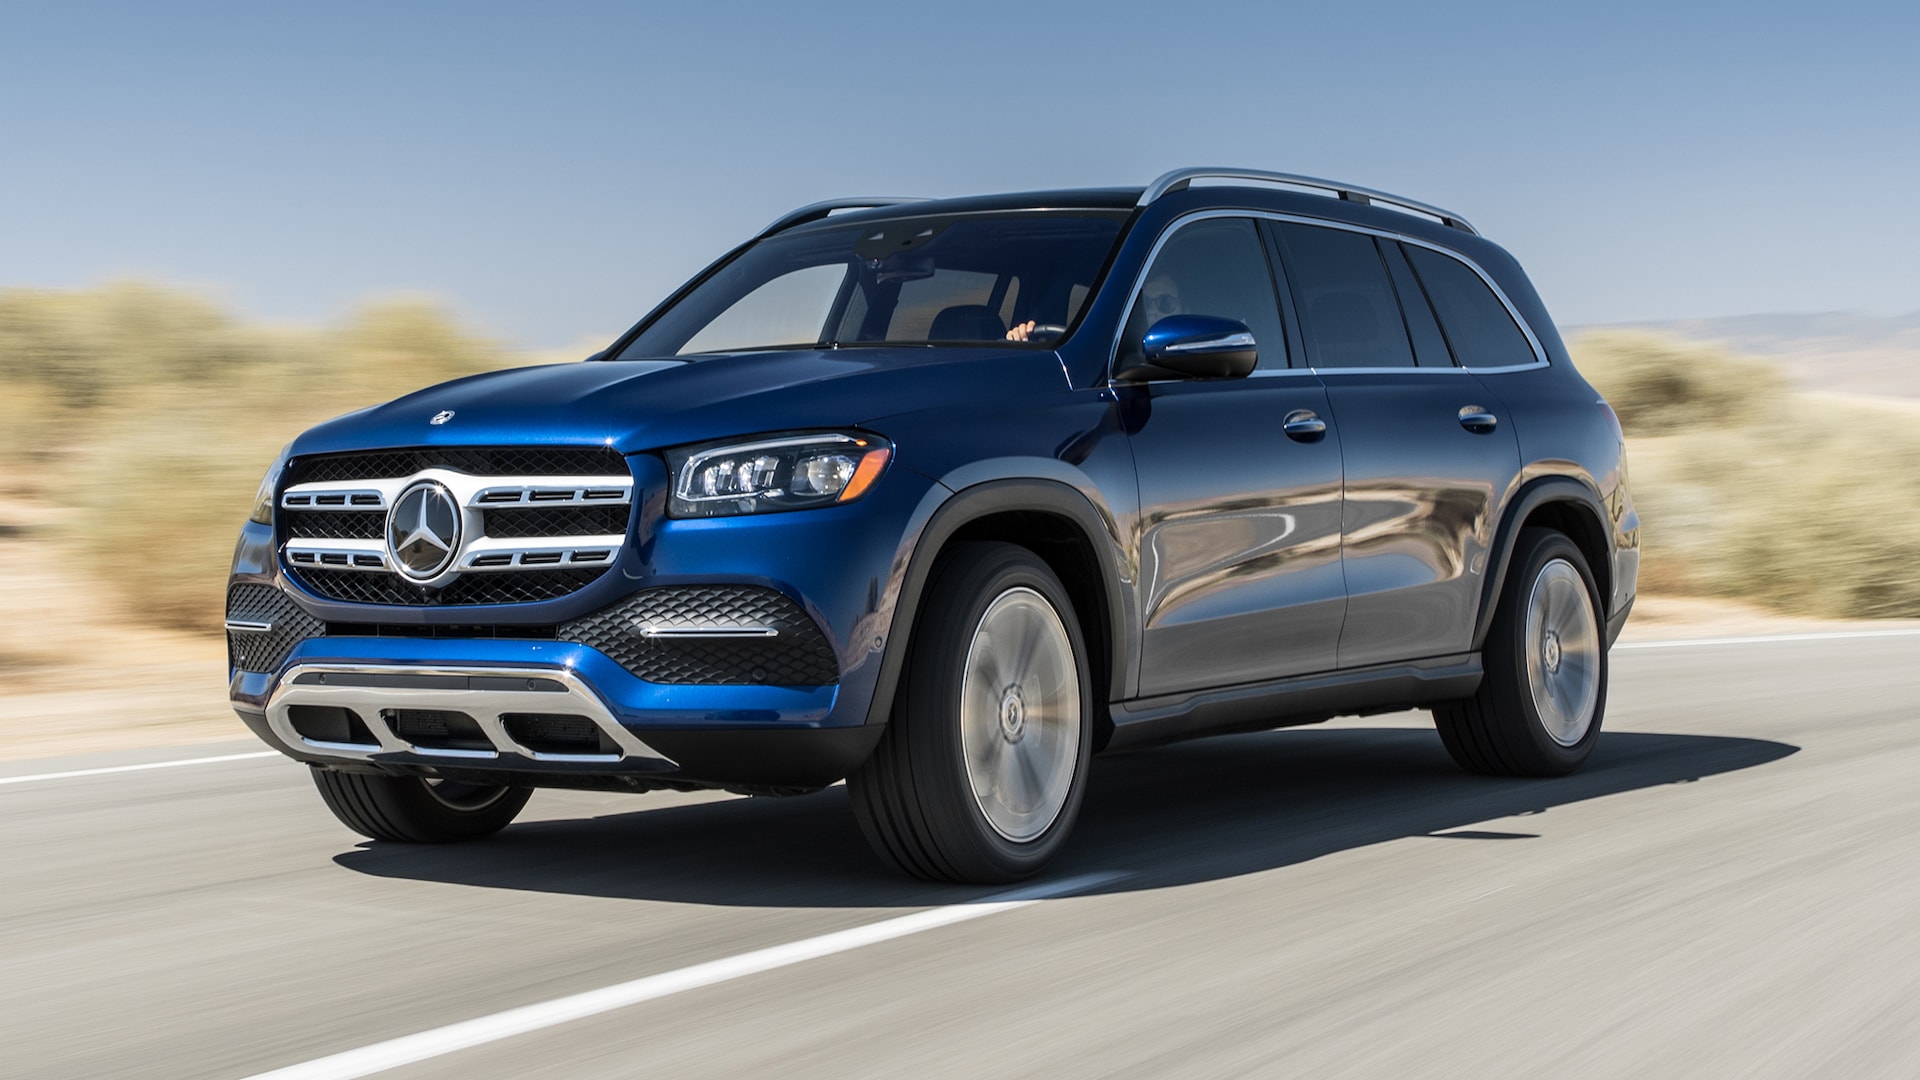 Review: The 2020 Mercedes-Benz GLS Needs to Work on its (E-)ABCs